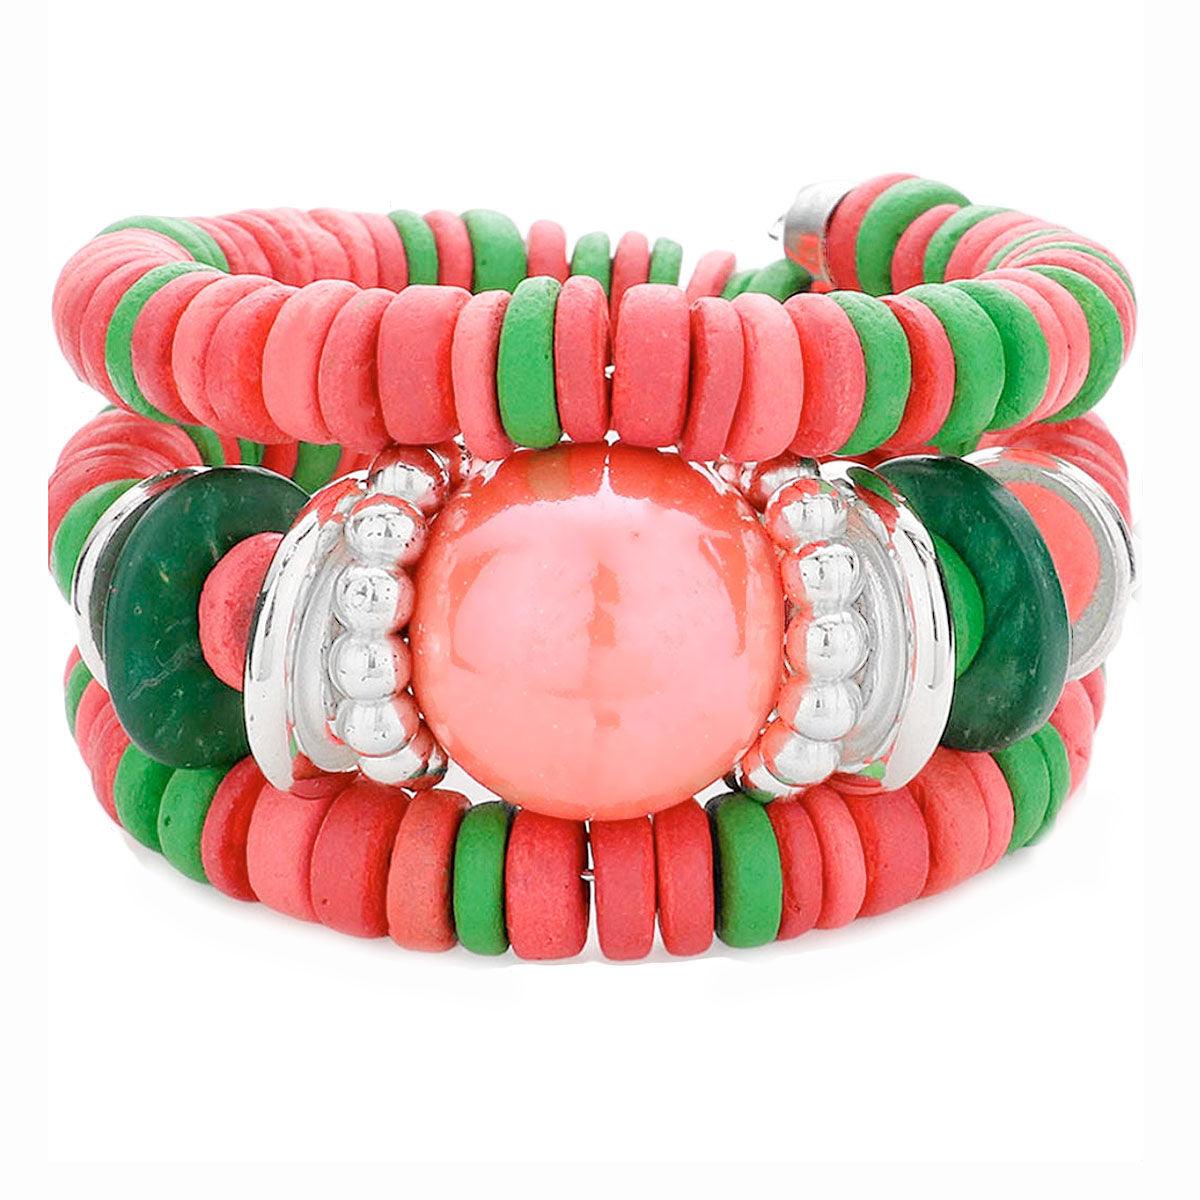 Turn Heads with Our Stunning Multicolor Wrap Bracelet - Get Yours Now!